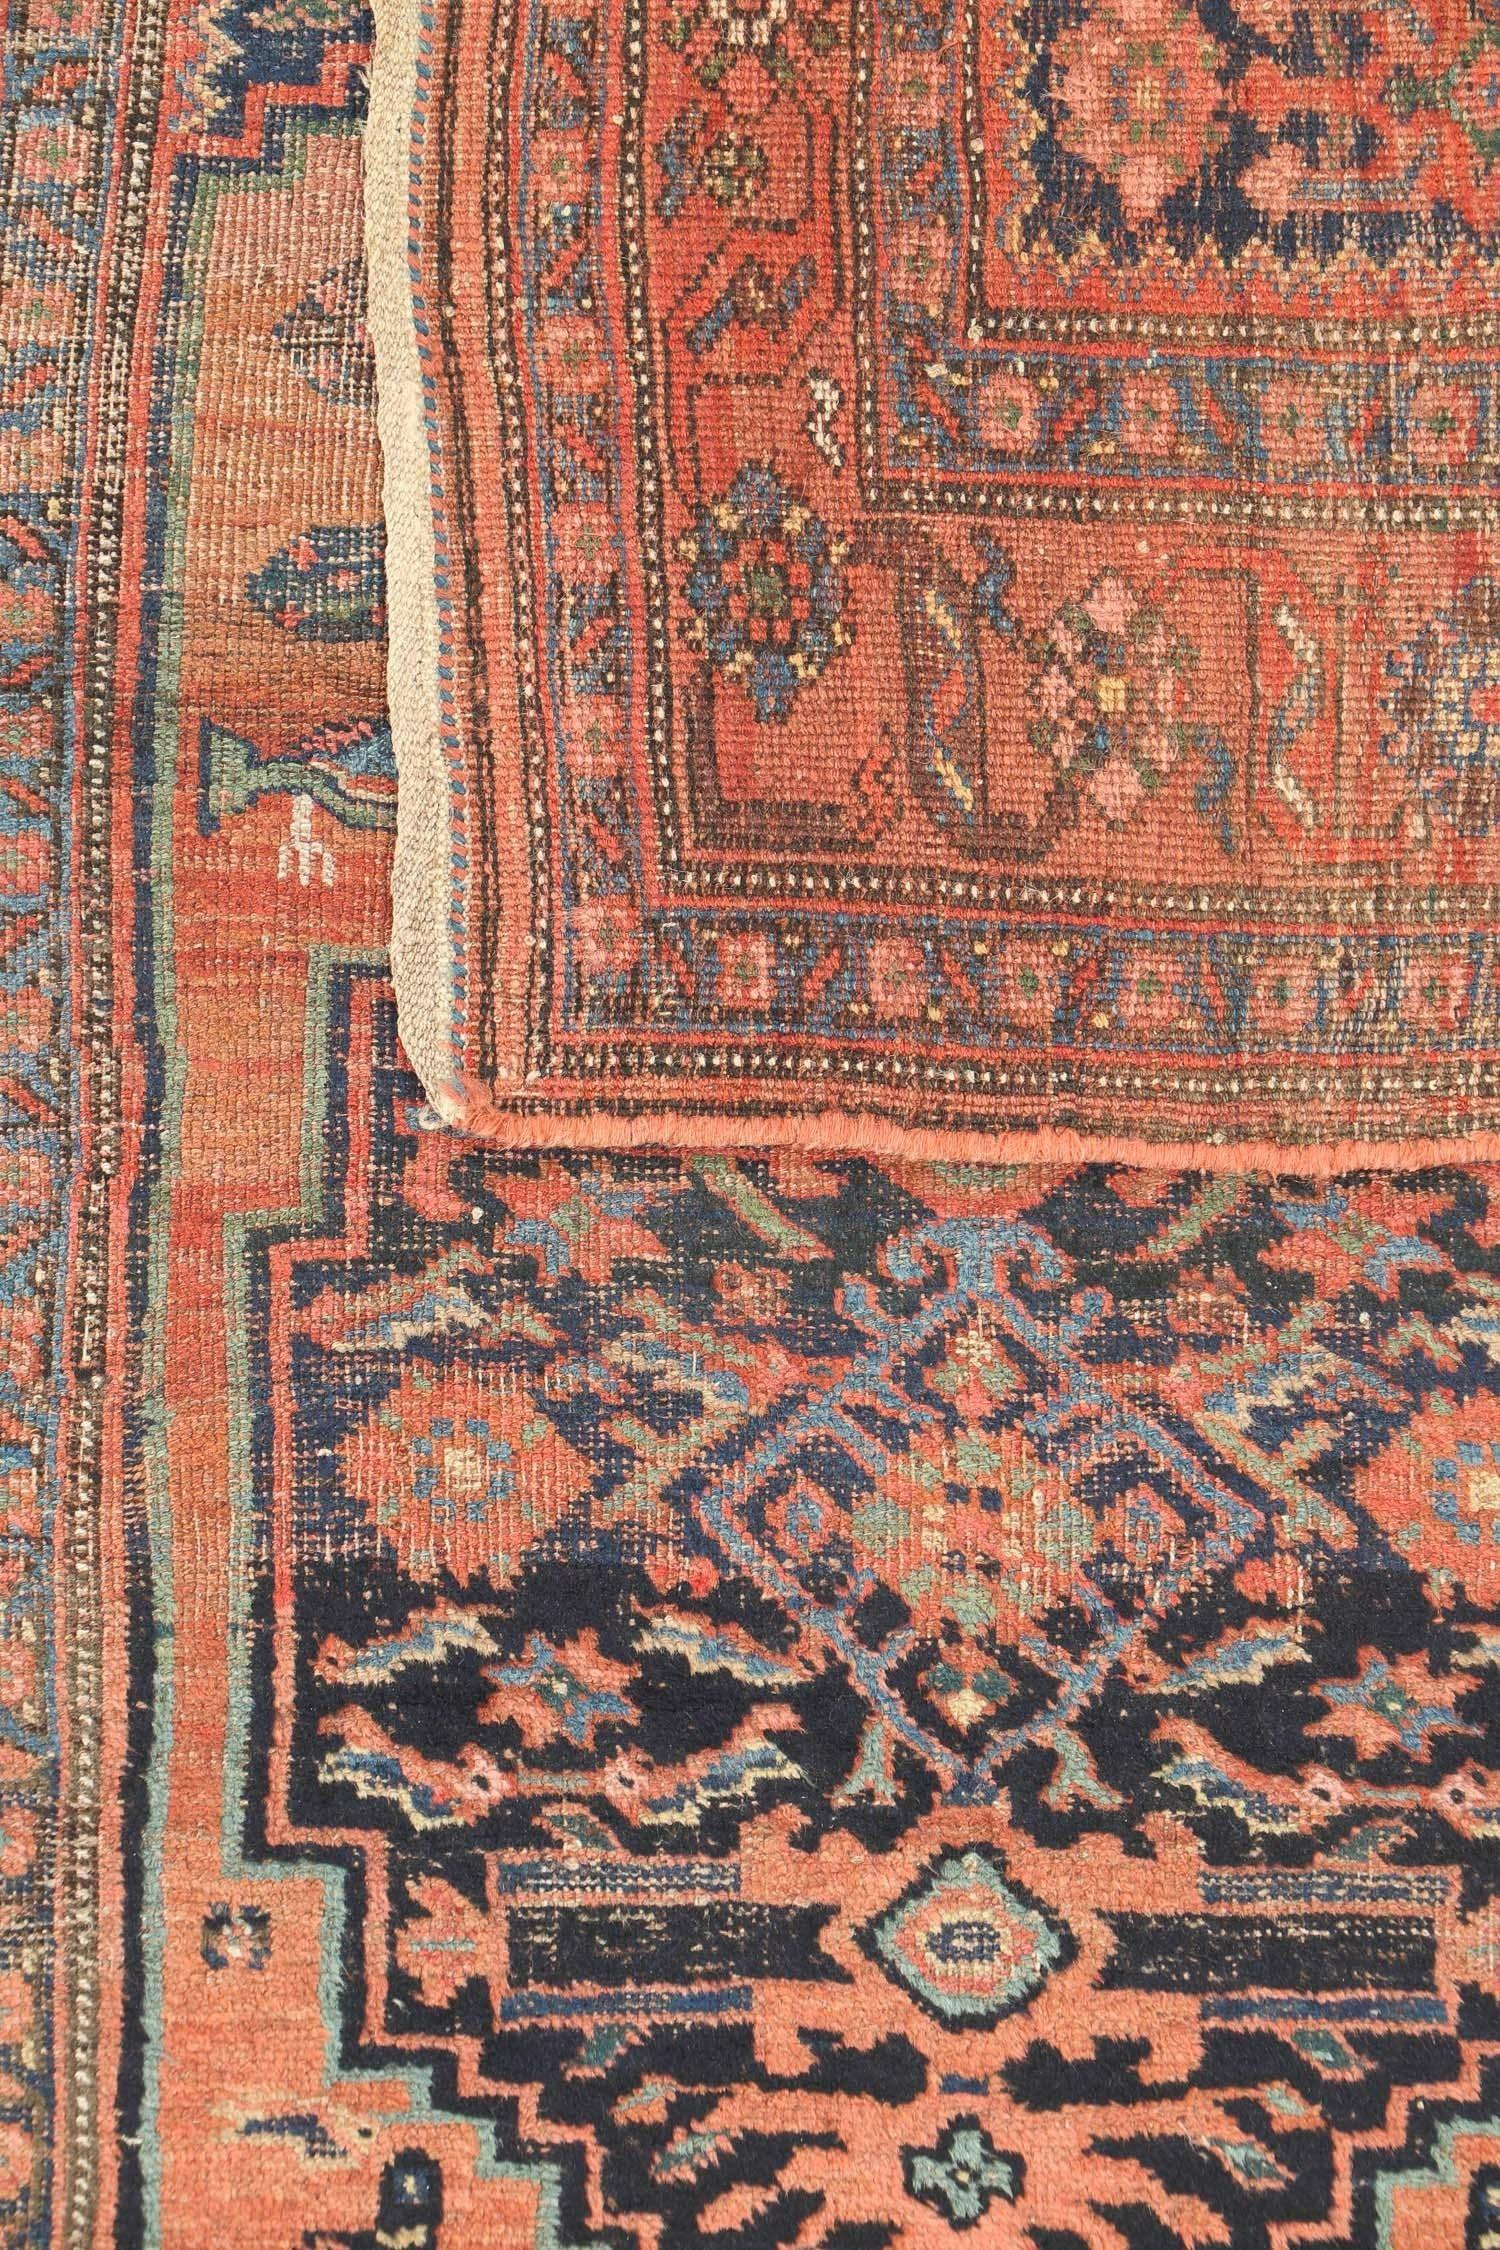 Antique Nomadic Artistic Kurdish Rug in Terracotta, Greens, Blackish-Indigo In Good Condition For Sale In Milwaukee, WI